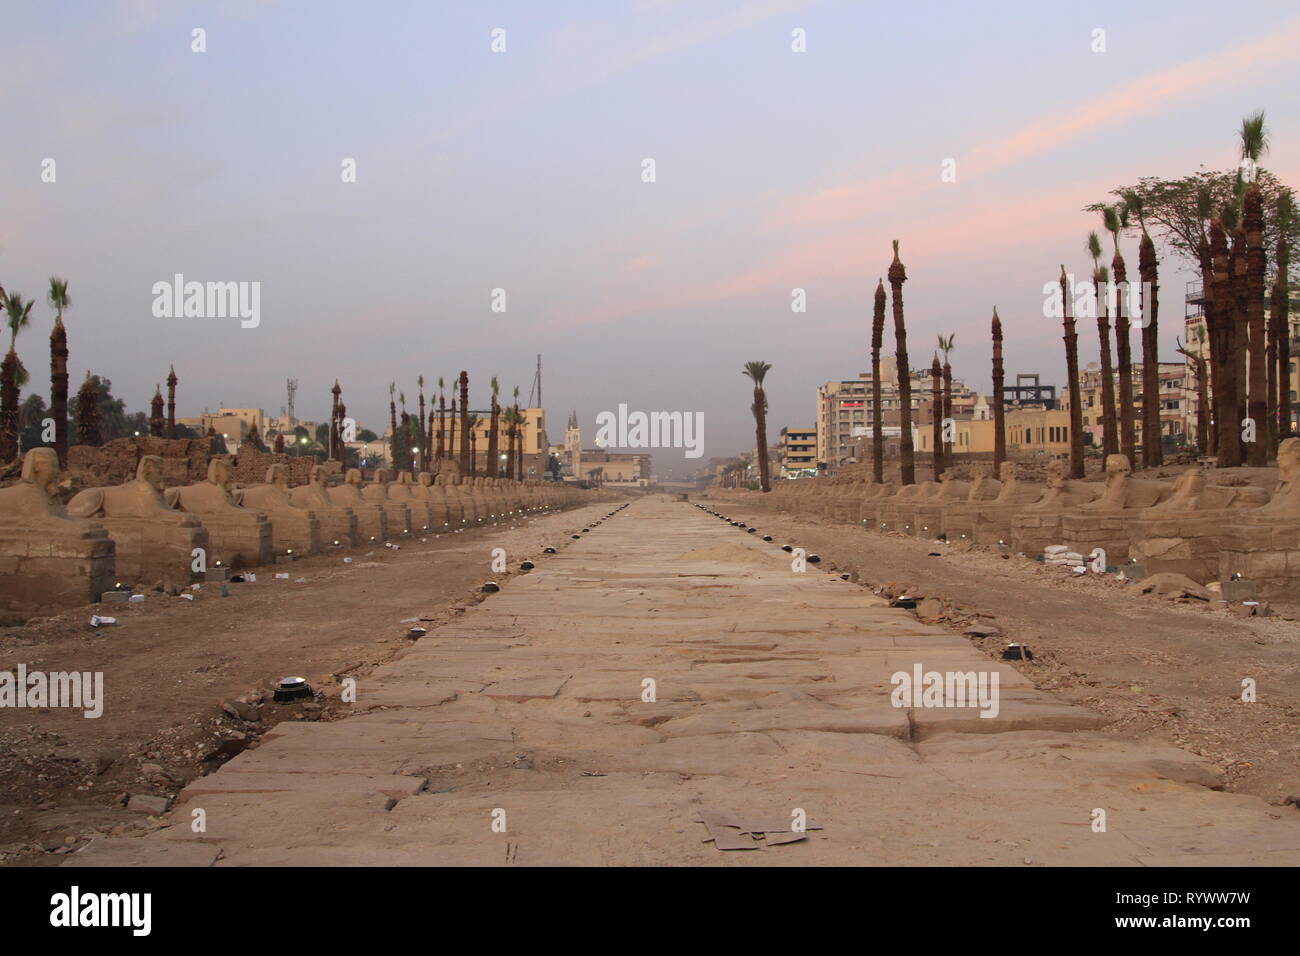 Avenue of the Sphinxes near sunset, Luxor Temple, Luxor, Upper Egypt Stock Photo